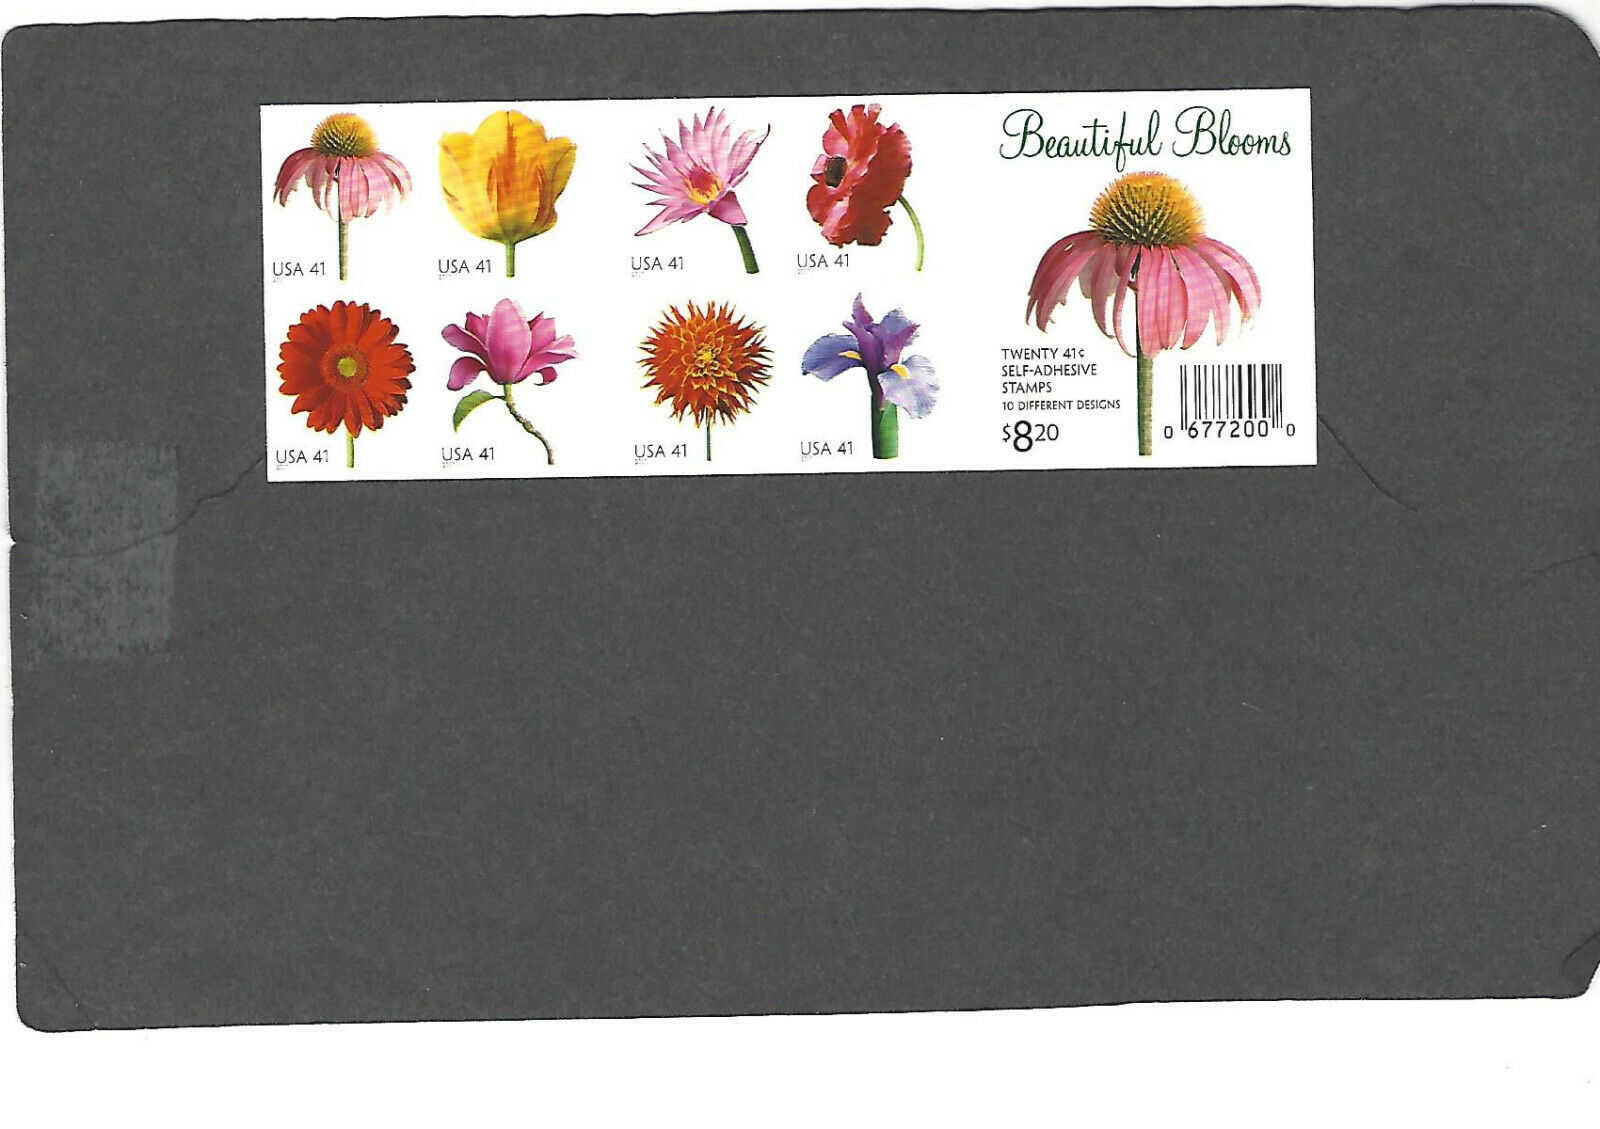 #4176-85 41c Beautiful Blooms Pane Of 20 Stamps Mnh Unfolded